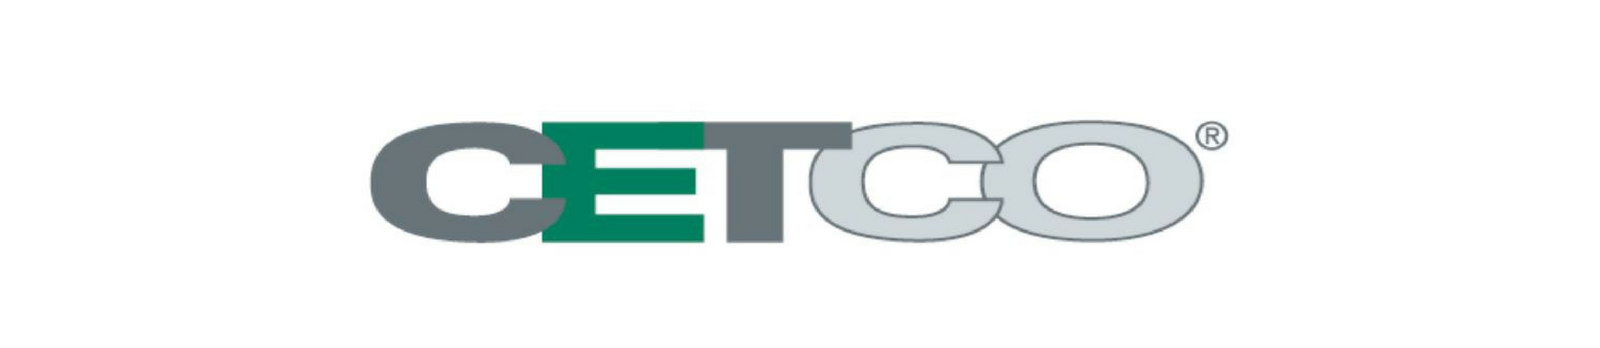 CETCO Geosynthetic Clay Liners